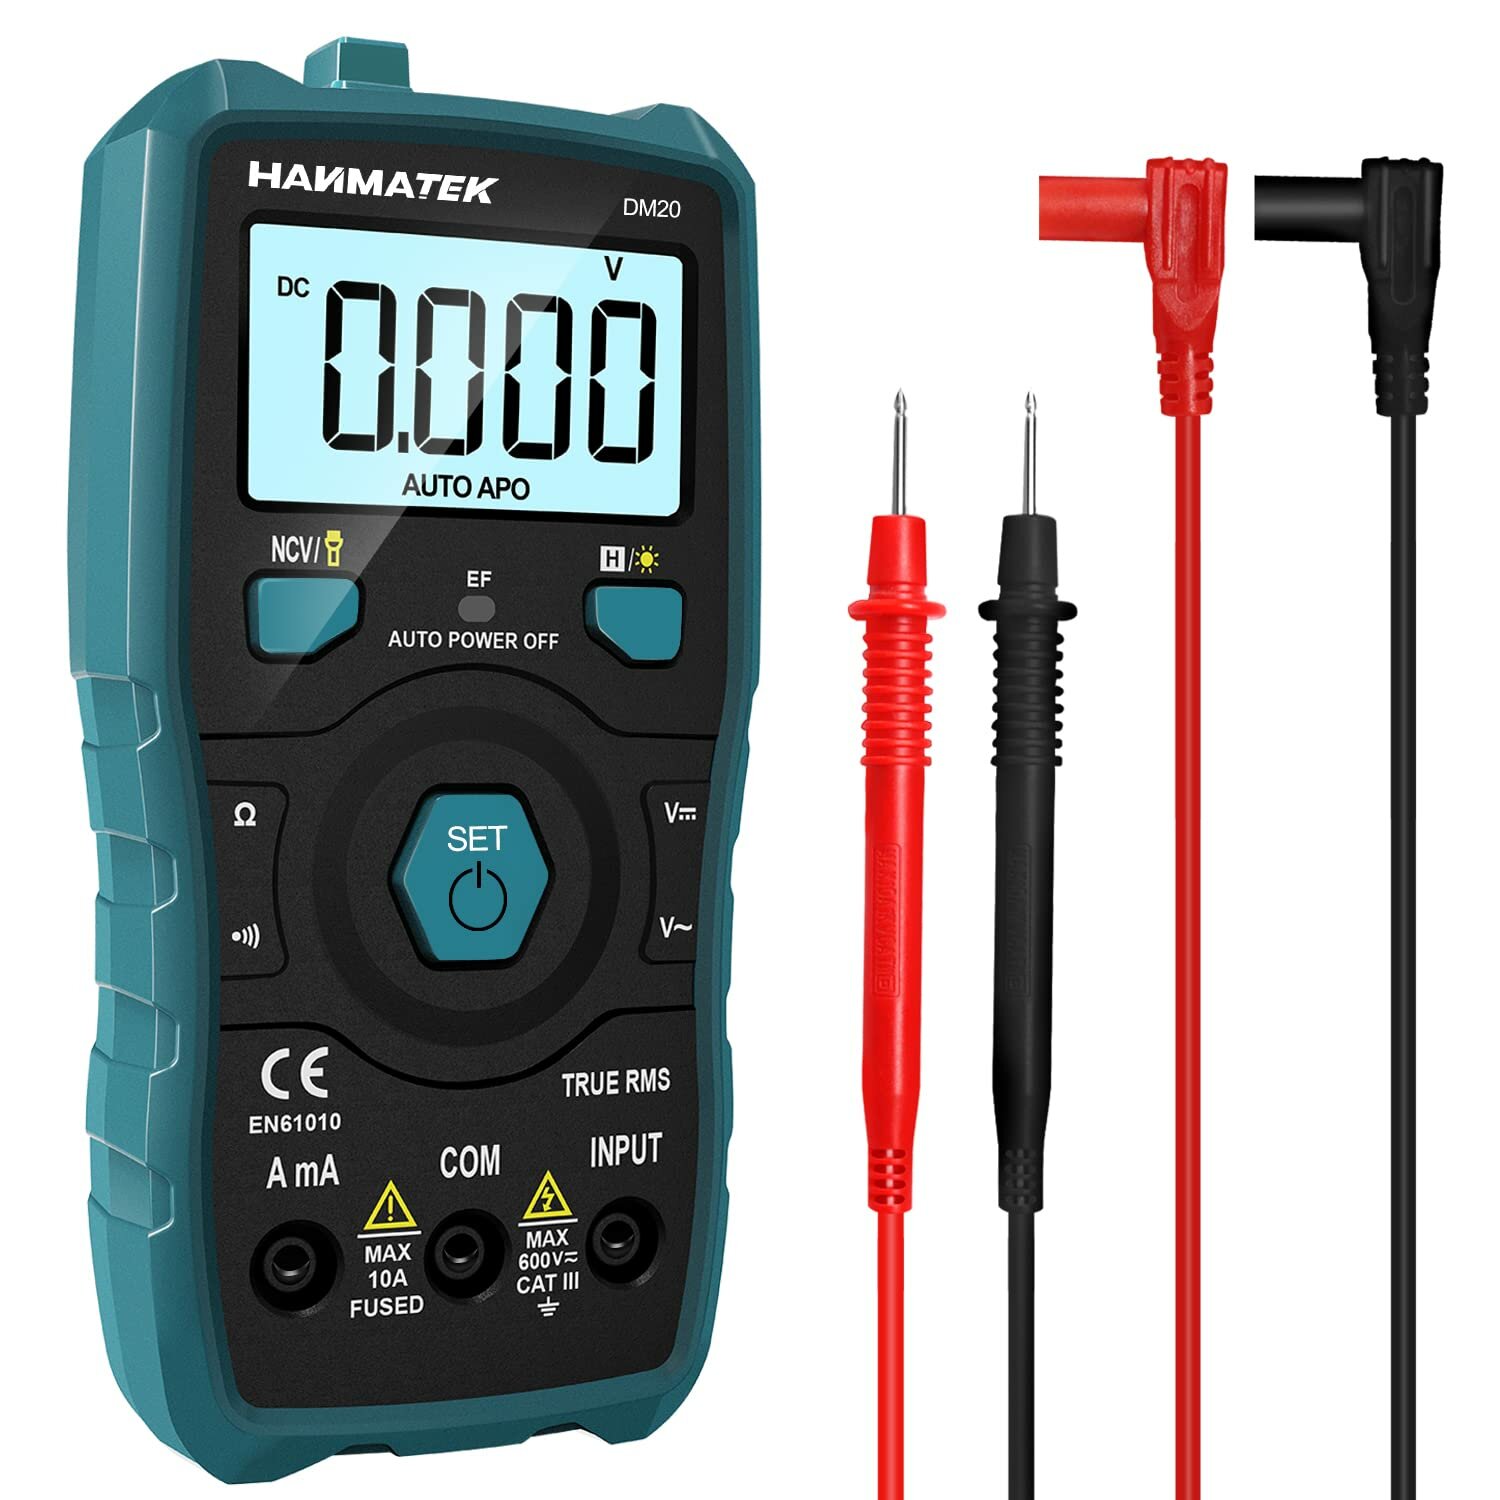 

HANMATEK DM20 Digital Multimeter Auto-Ranging 6000 Counts Smart Electrical Tester with Non-Contact Voltage Function Safe